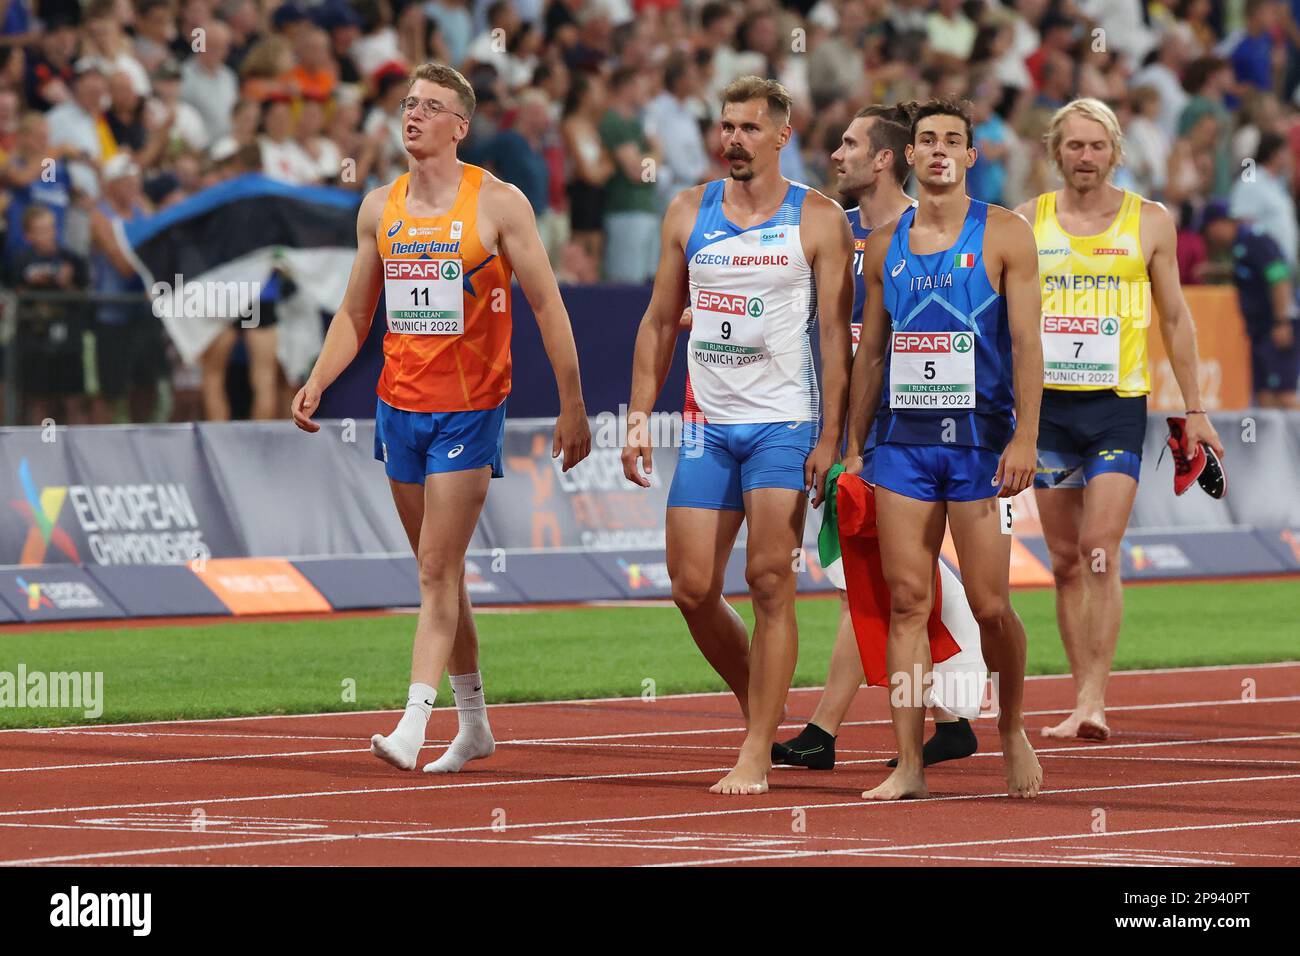 Decathletes walking across the track at the end of the decathlon at the European Athletics Championship 2022 Stock Photo